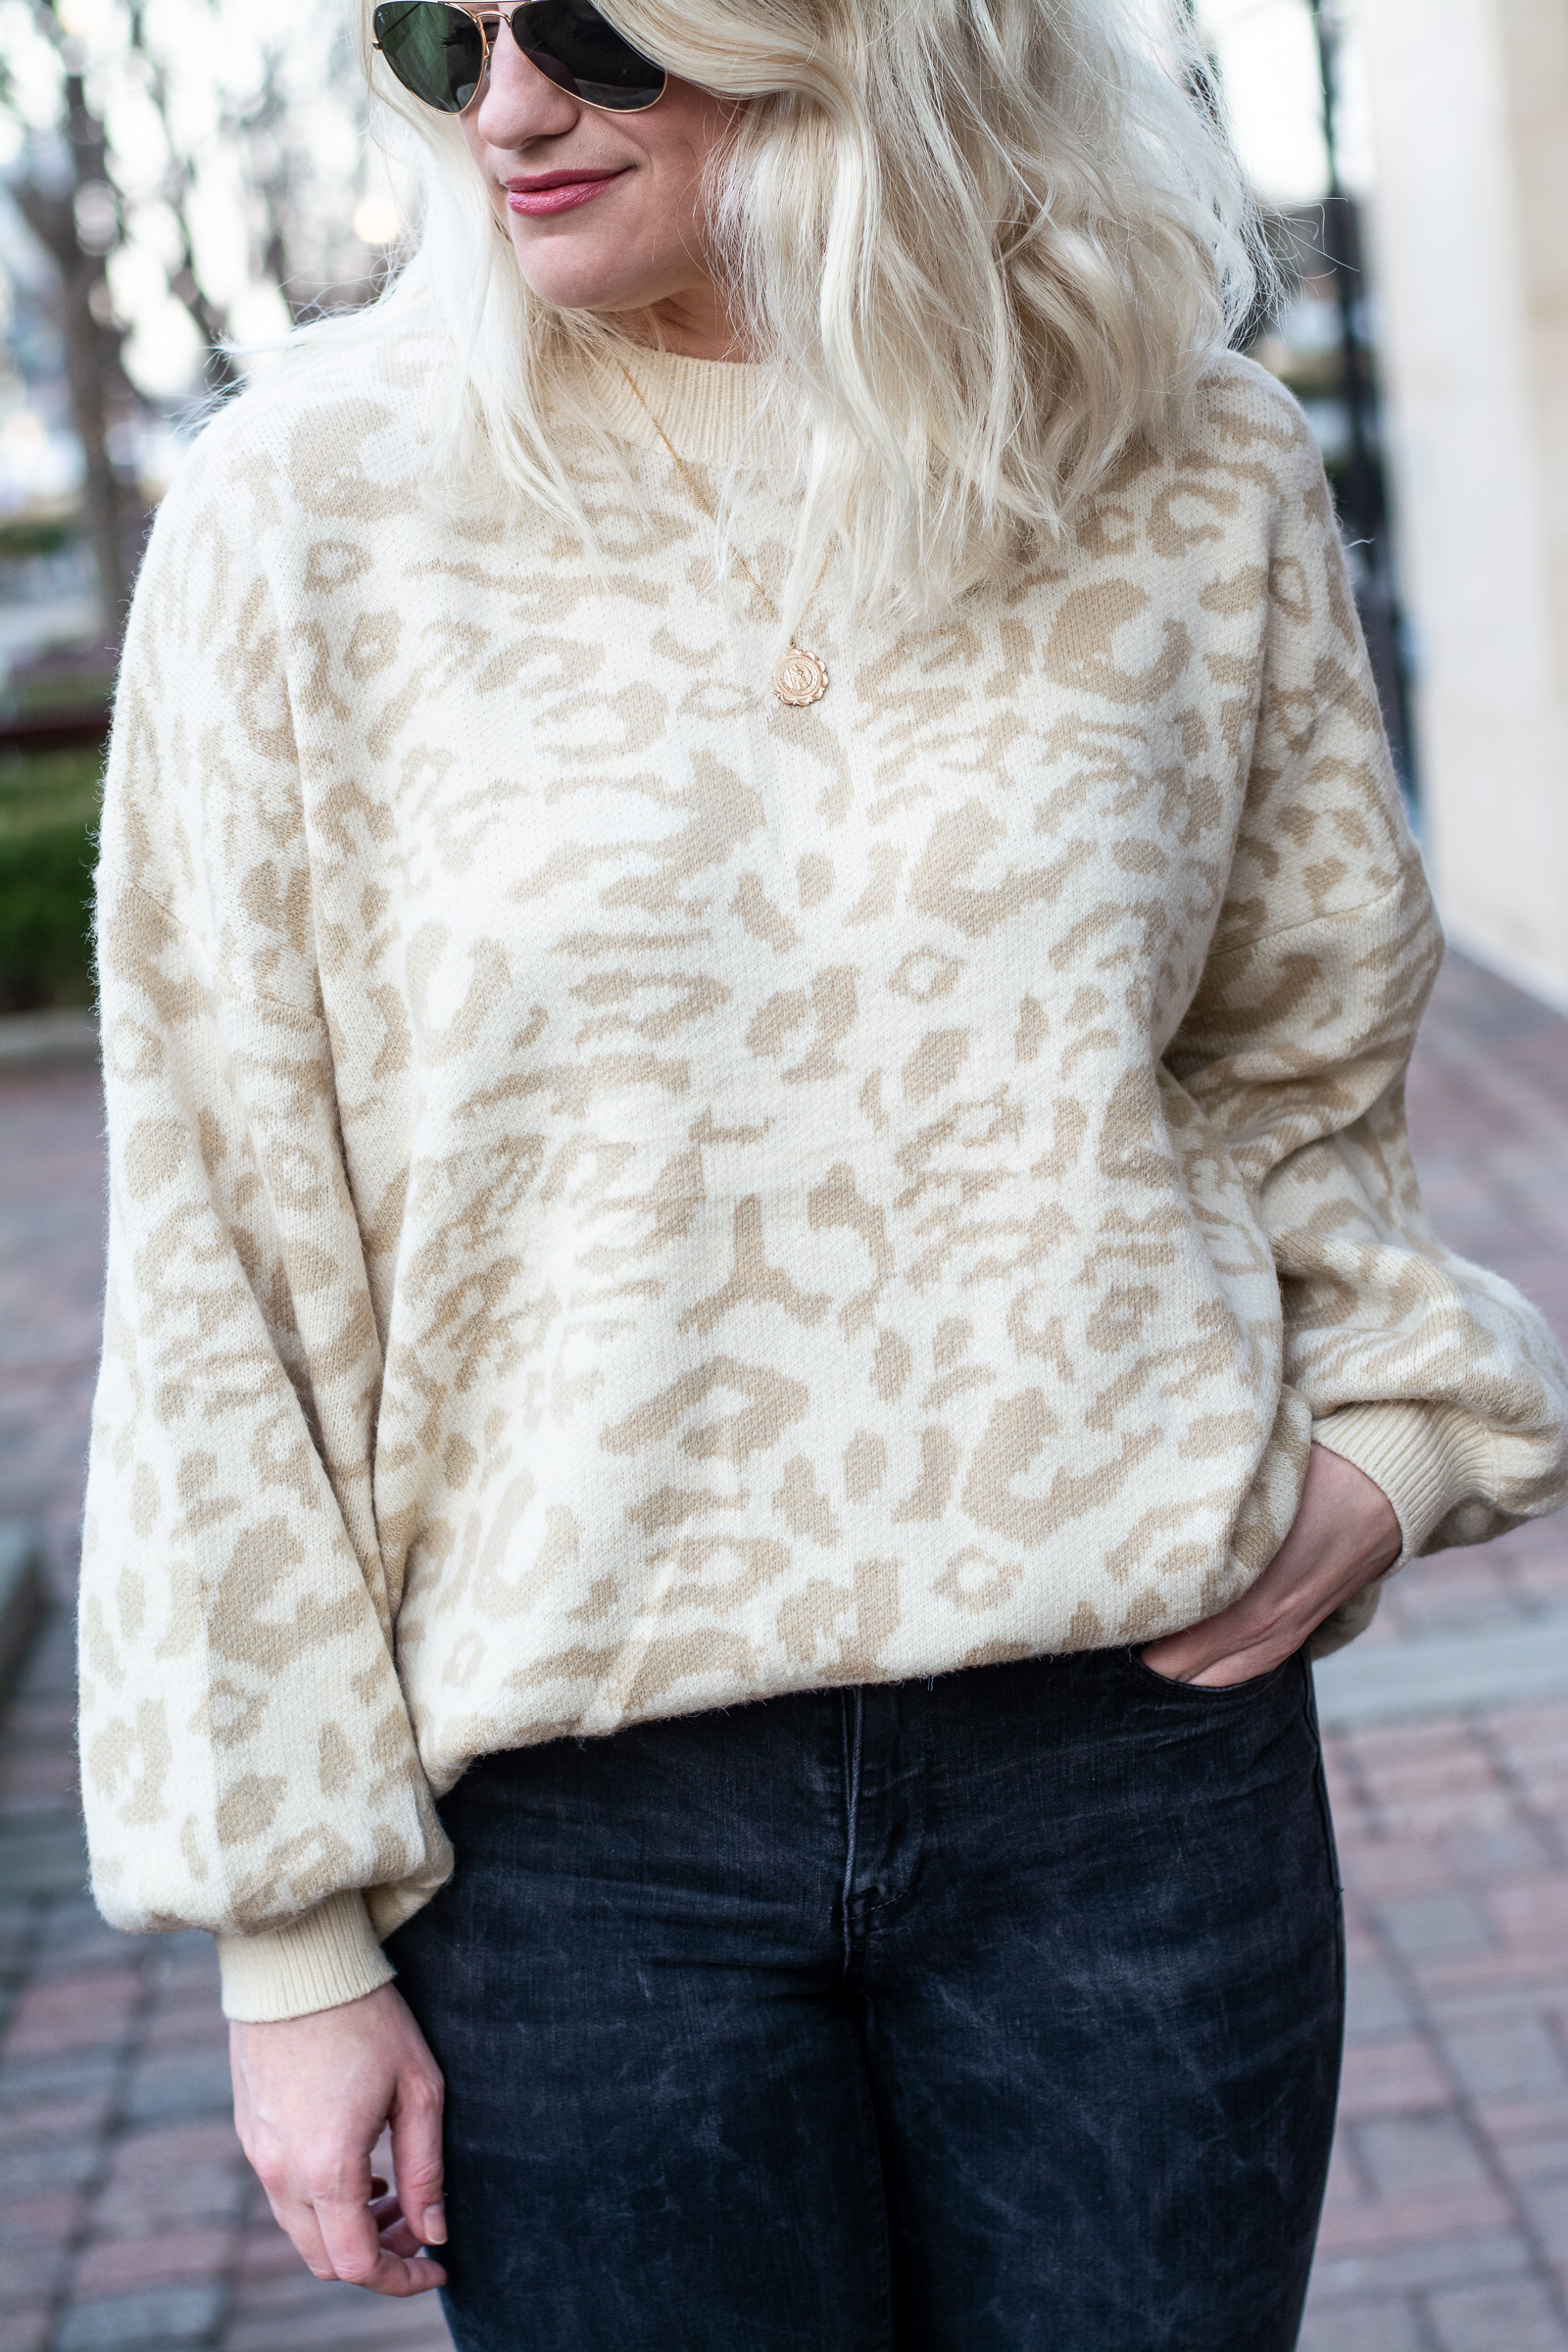 Oversized Neutral Leopard Sweater + Pumps. | Ash from LSR